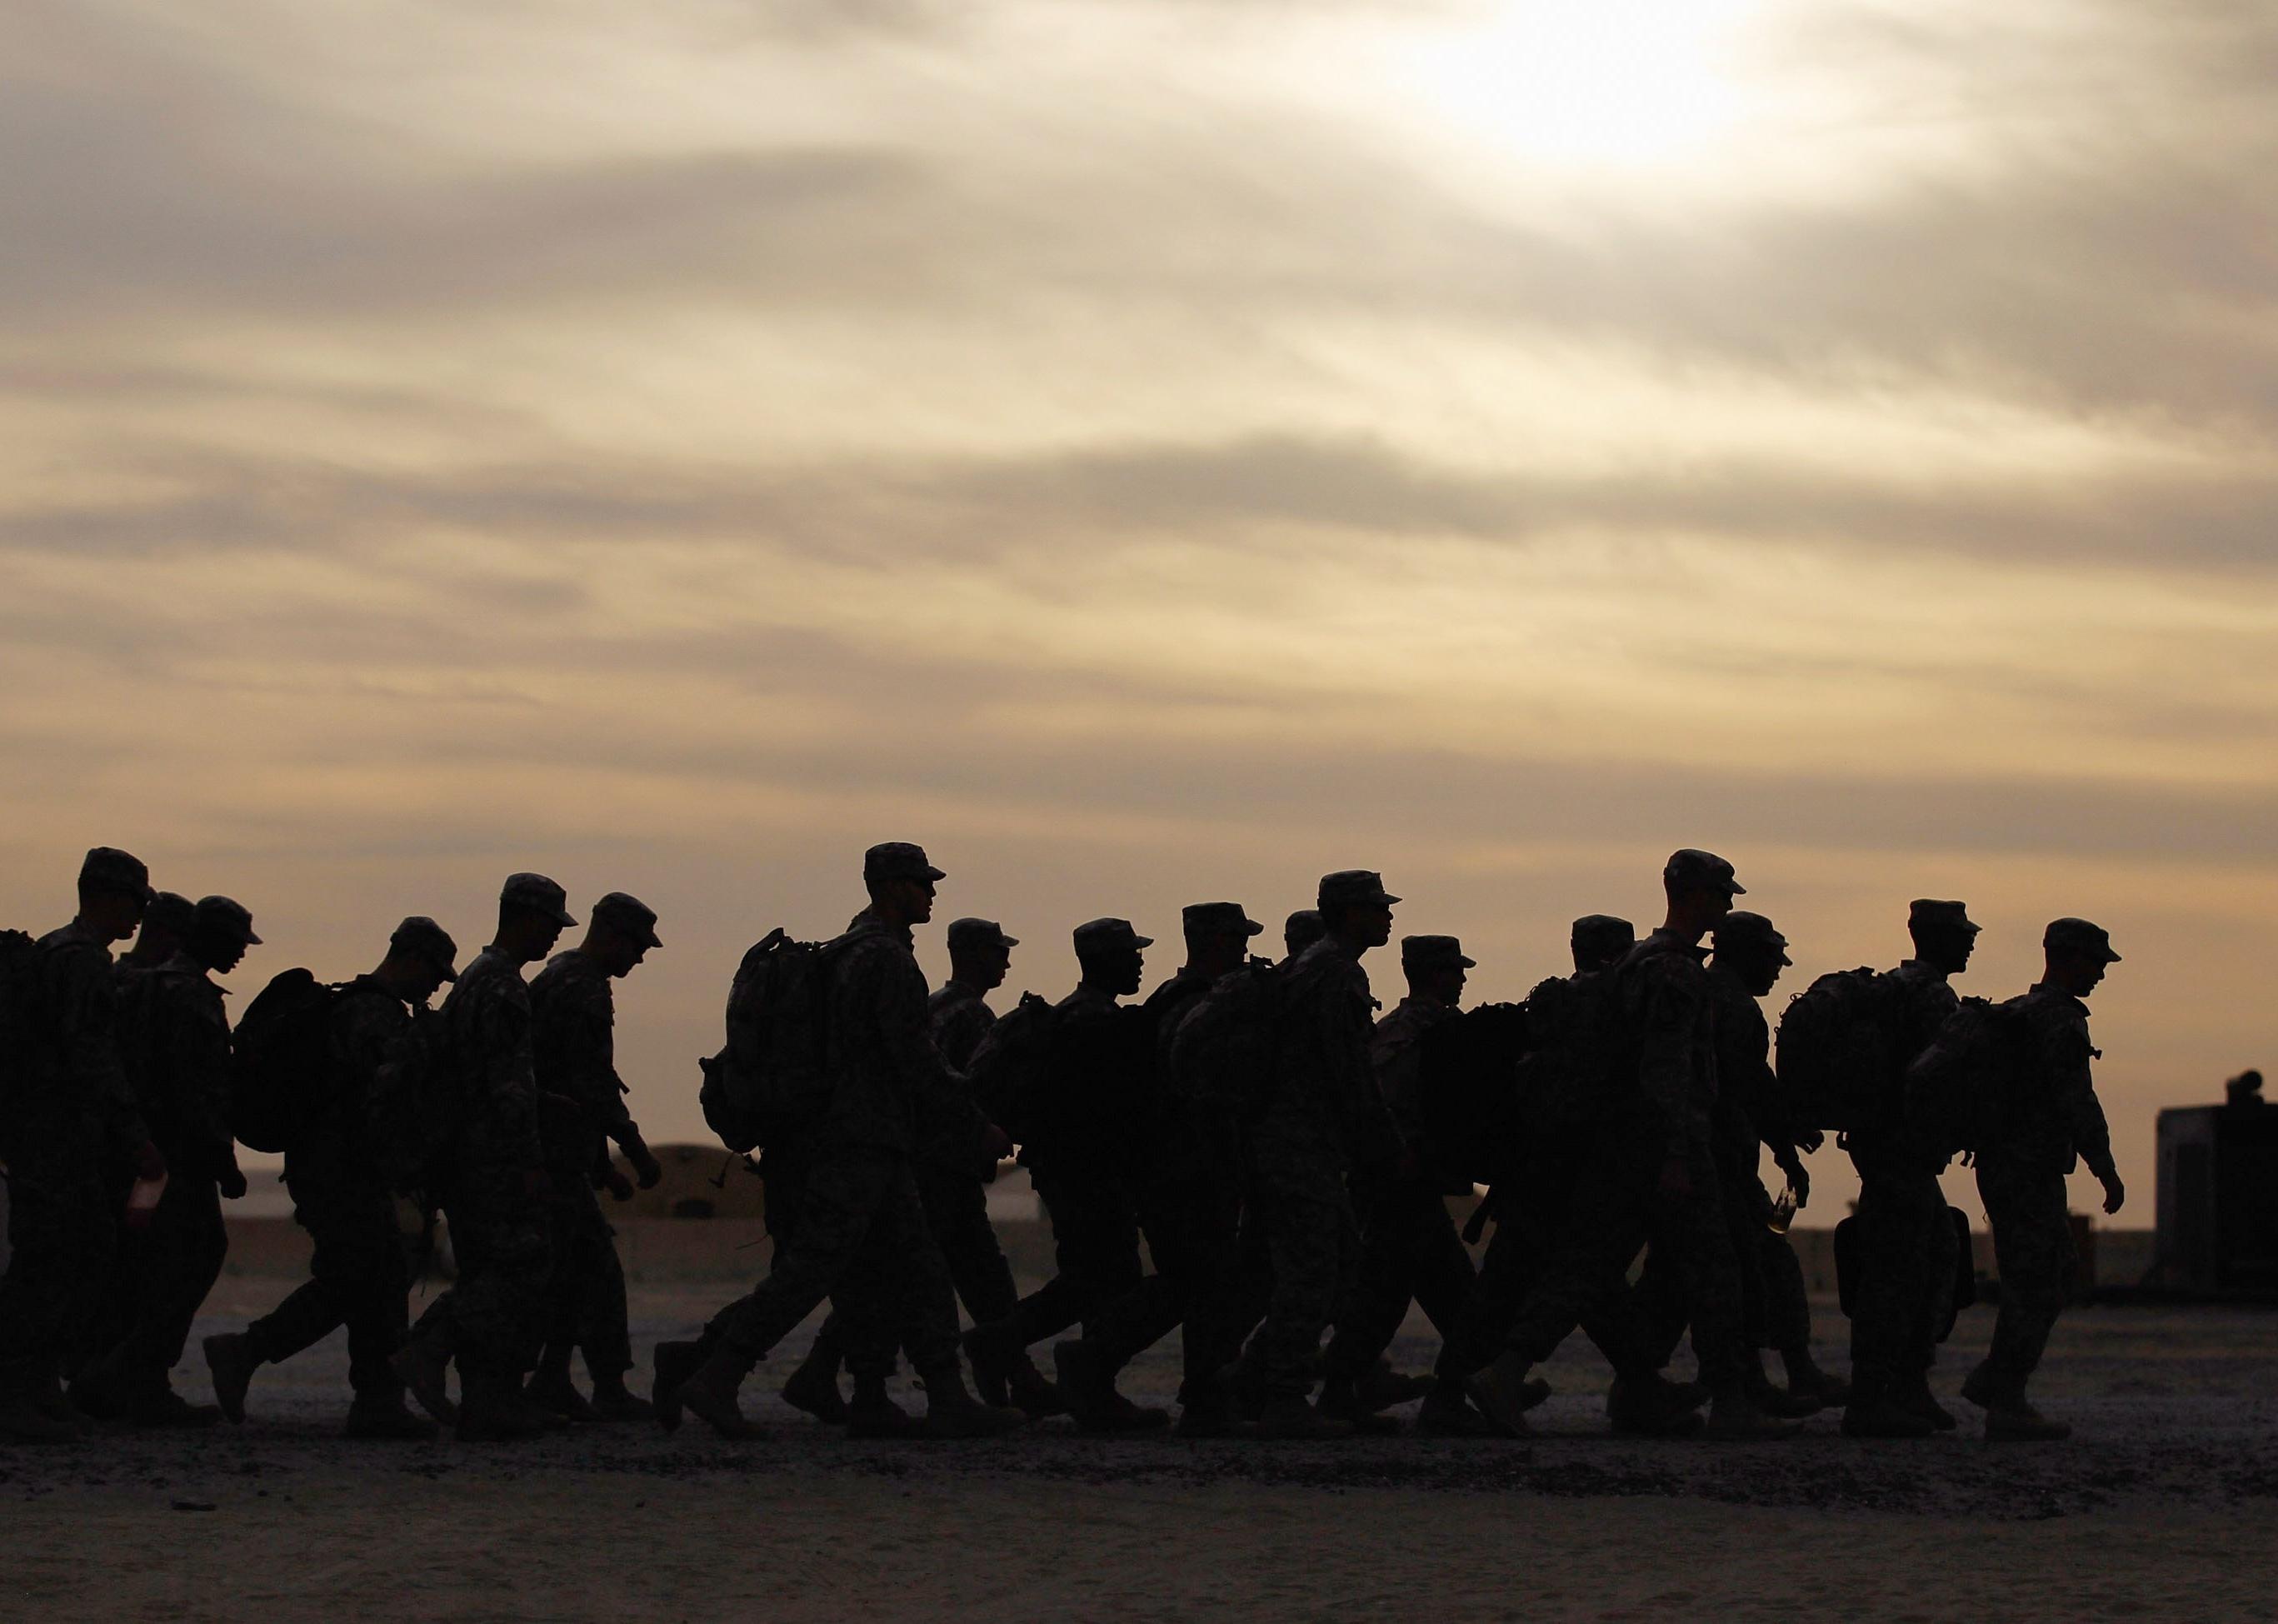 U.S. Army soldiers withdrawing from Iraq.